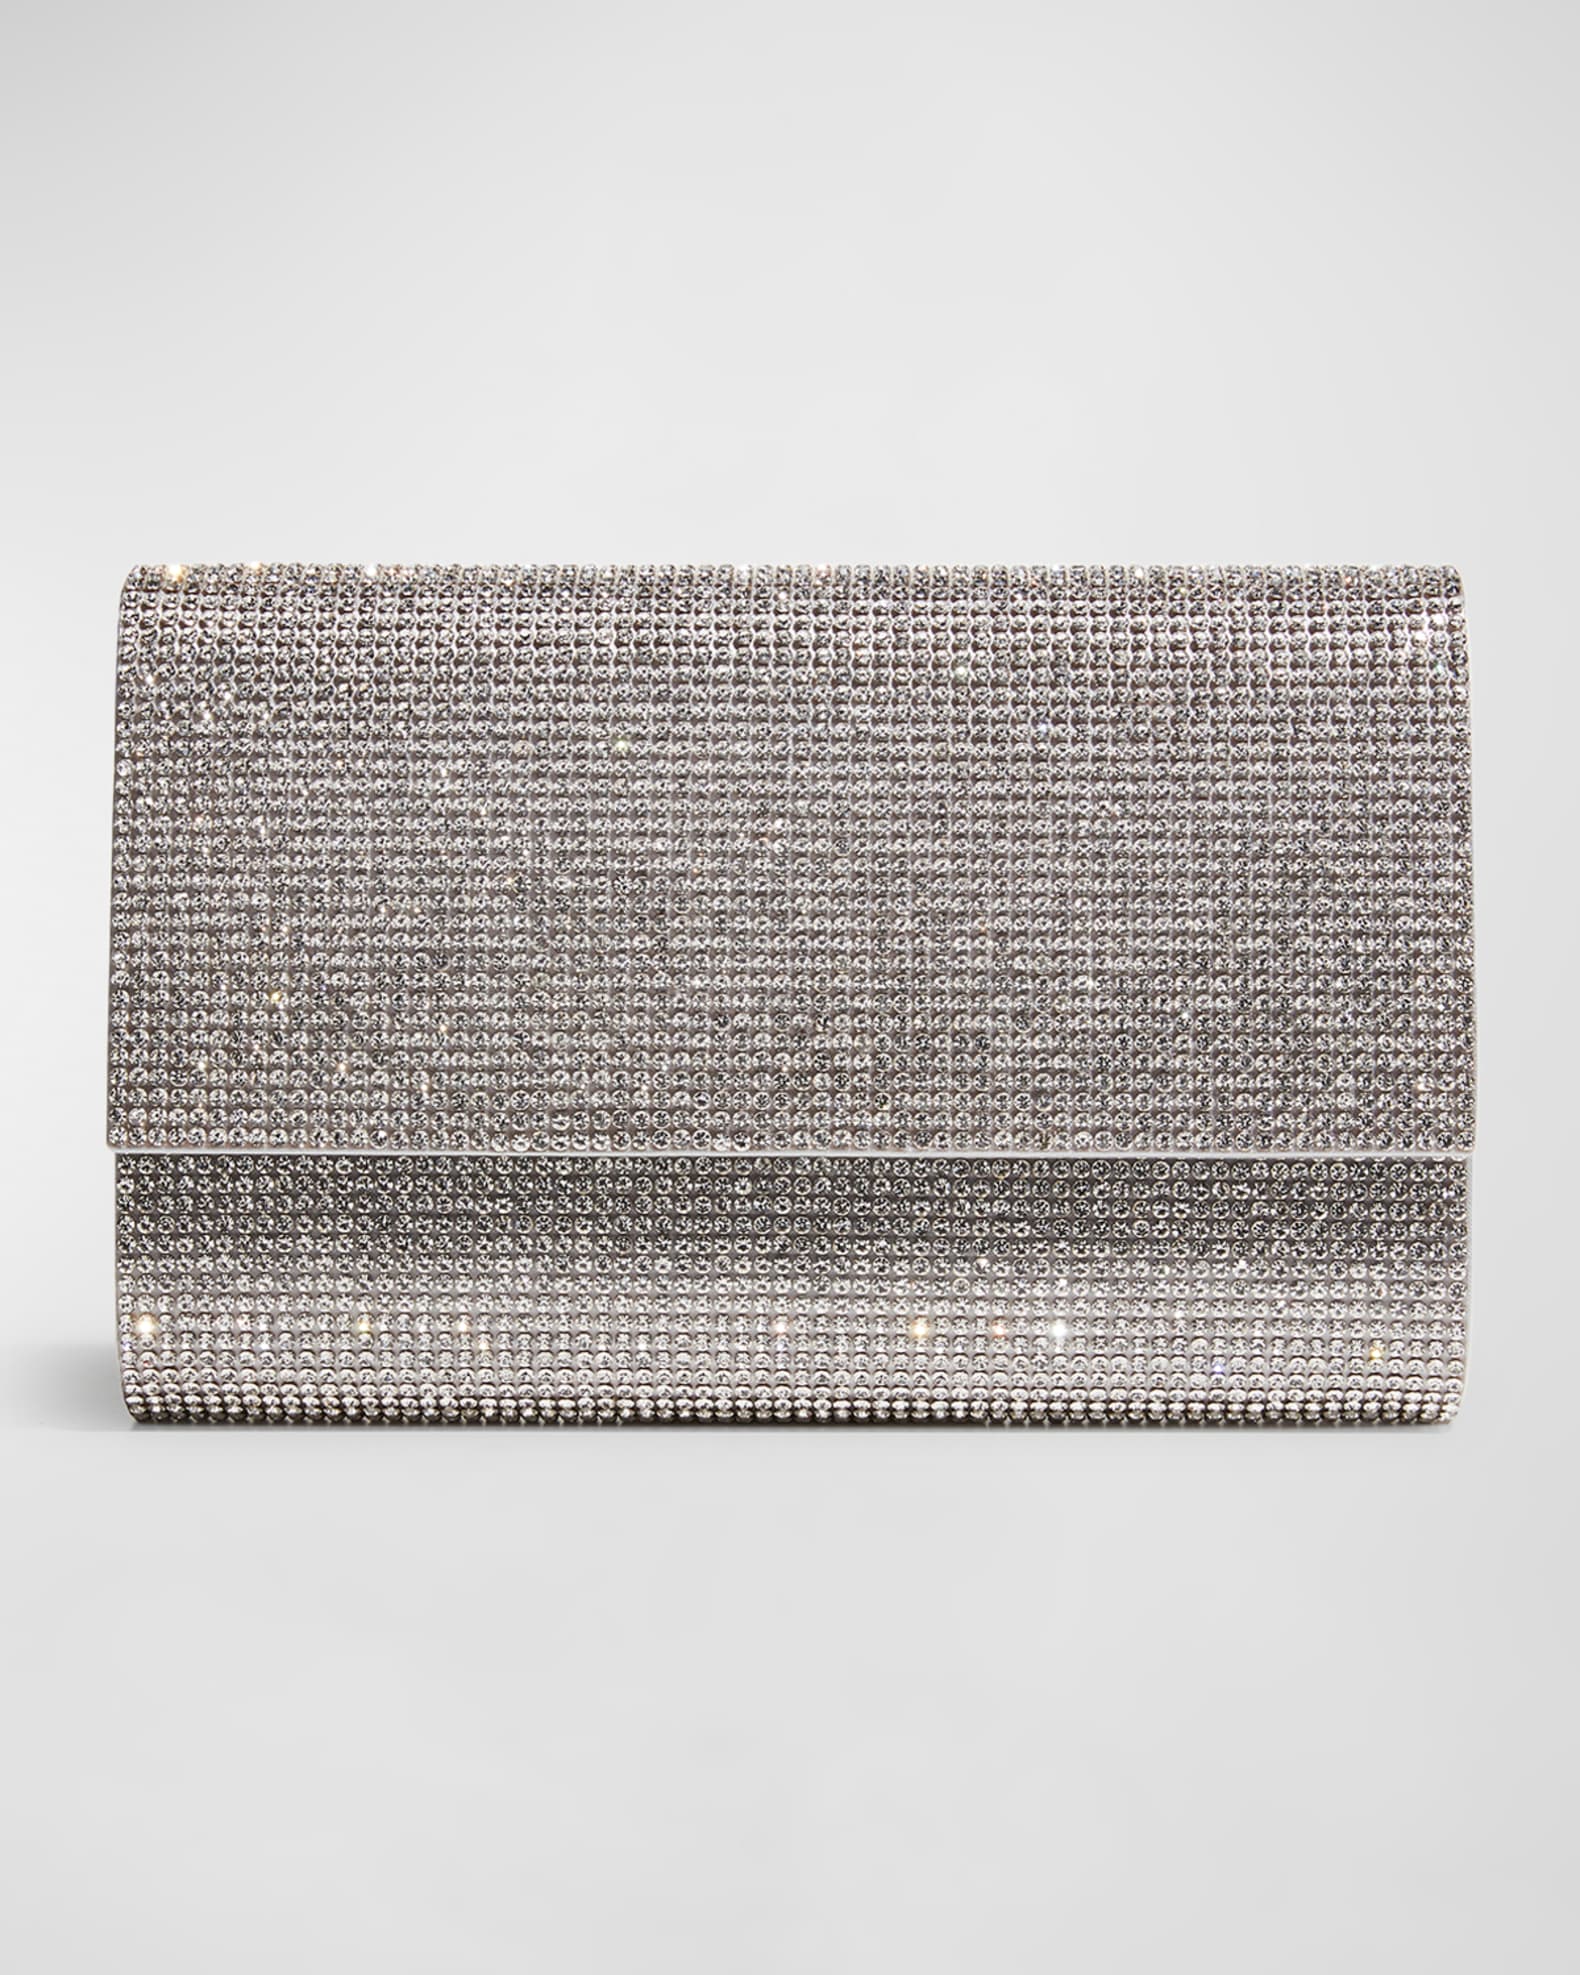 Exceptional Chanel 'Diamond Forever' Flap Bag sparkles in New York